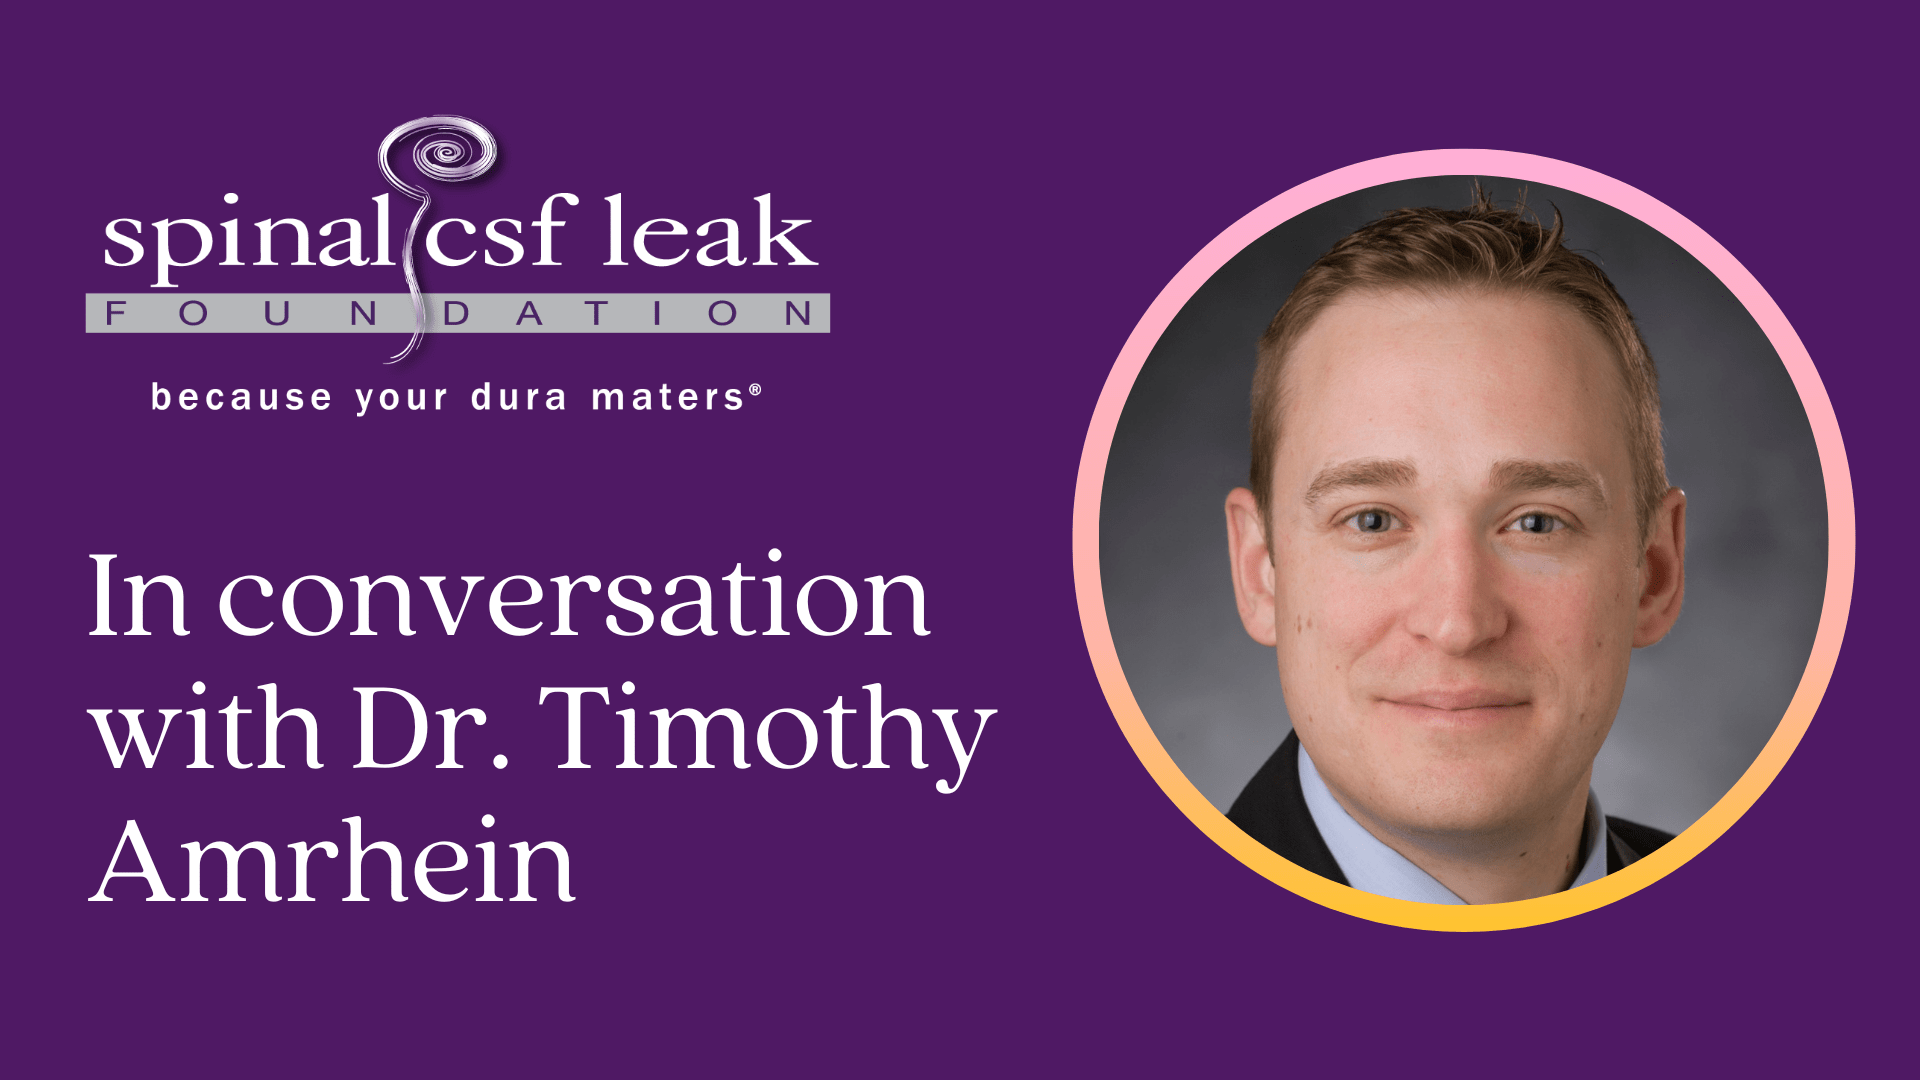 In conversation with Dr. Timothy Amrhein